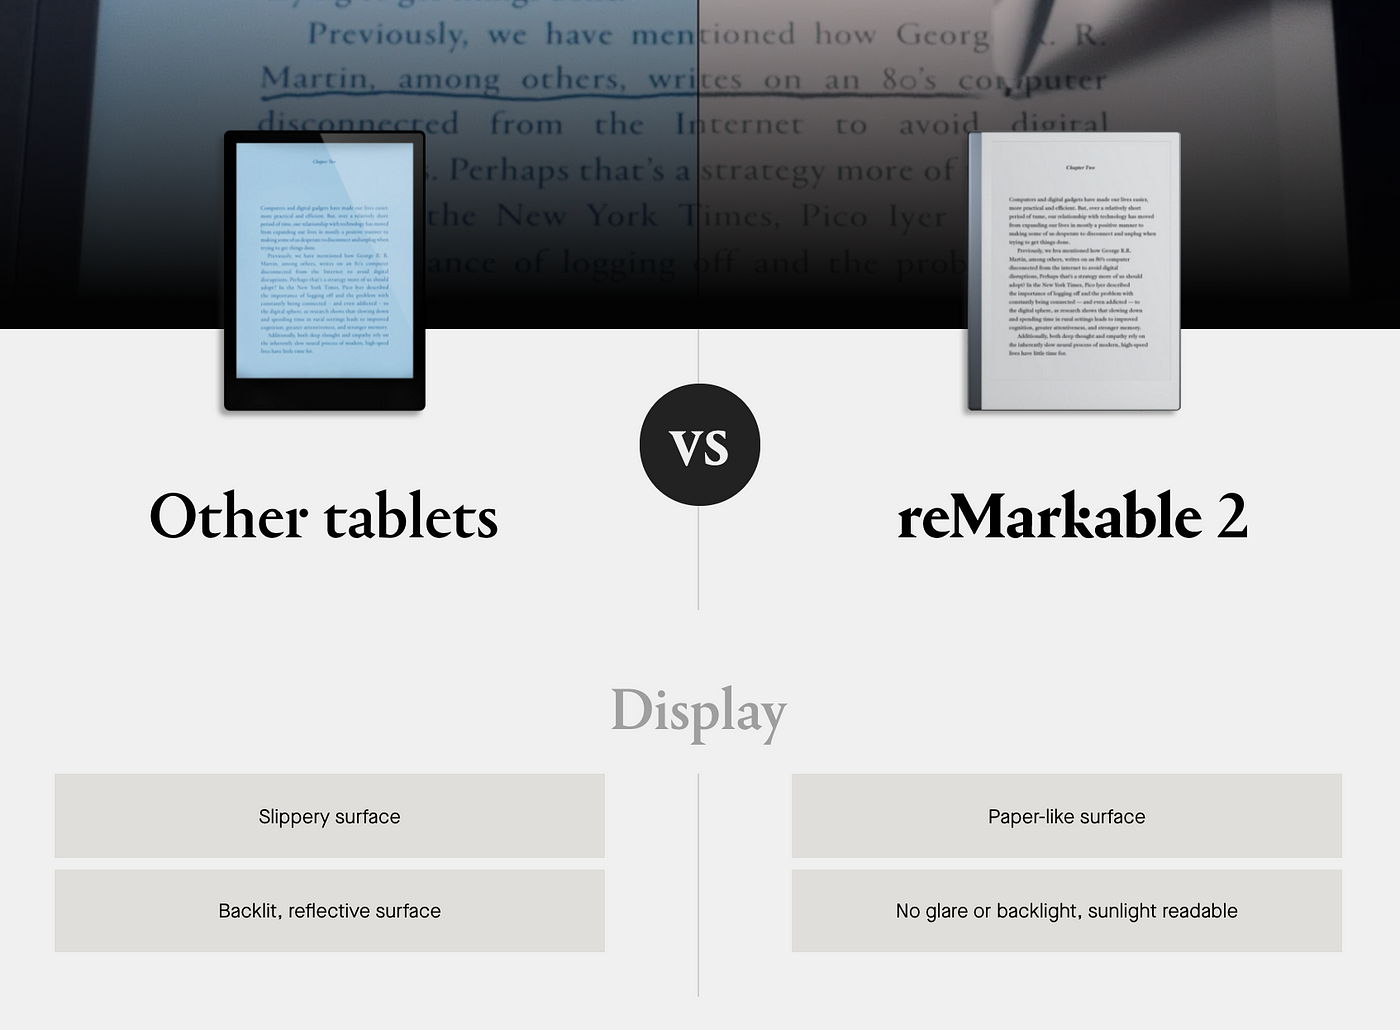 reMarkable 2 Tablet Review & Comparison - Swarthmore College - ITS Blog